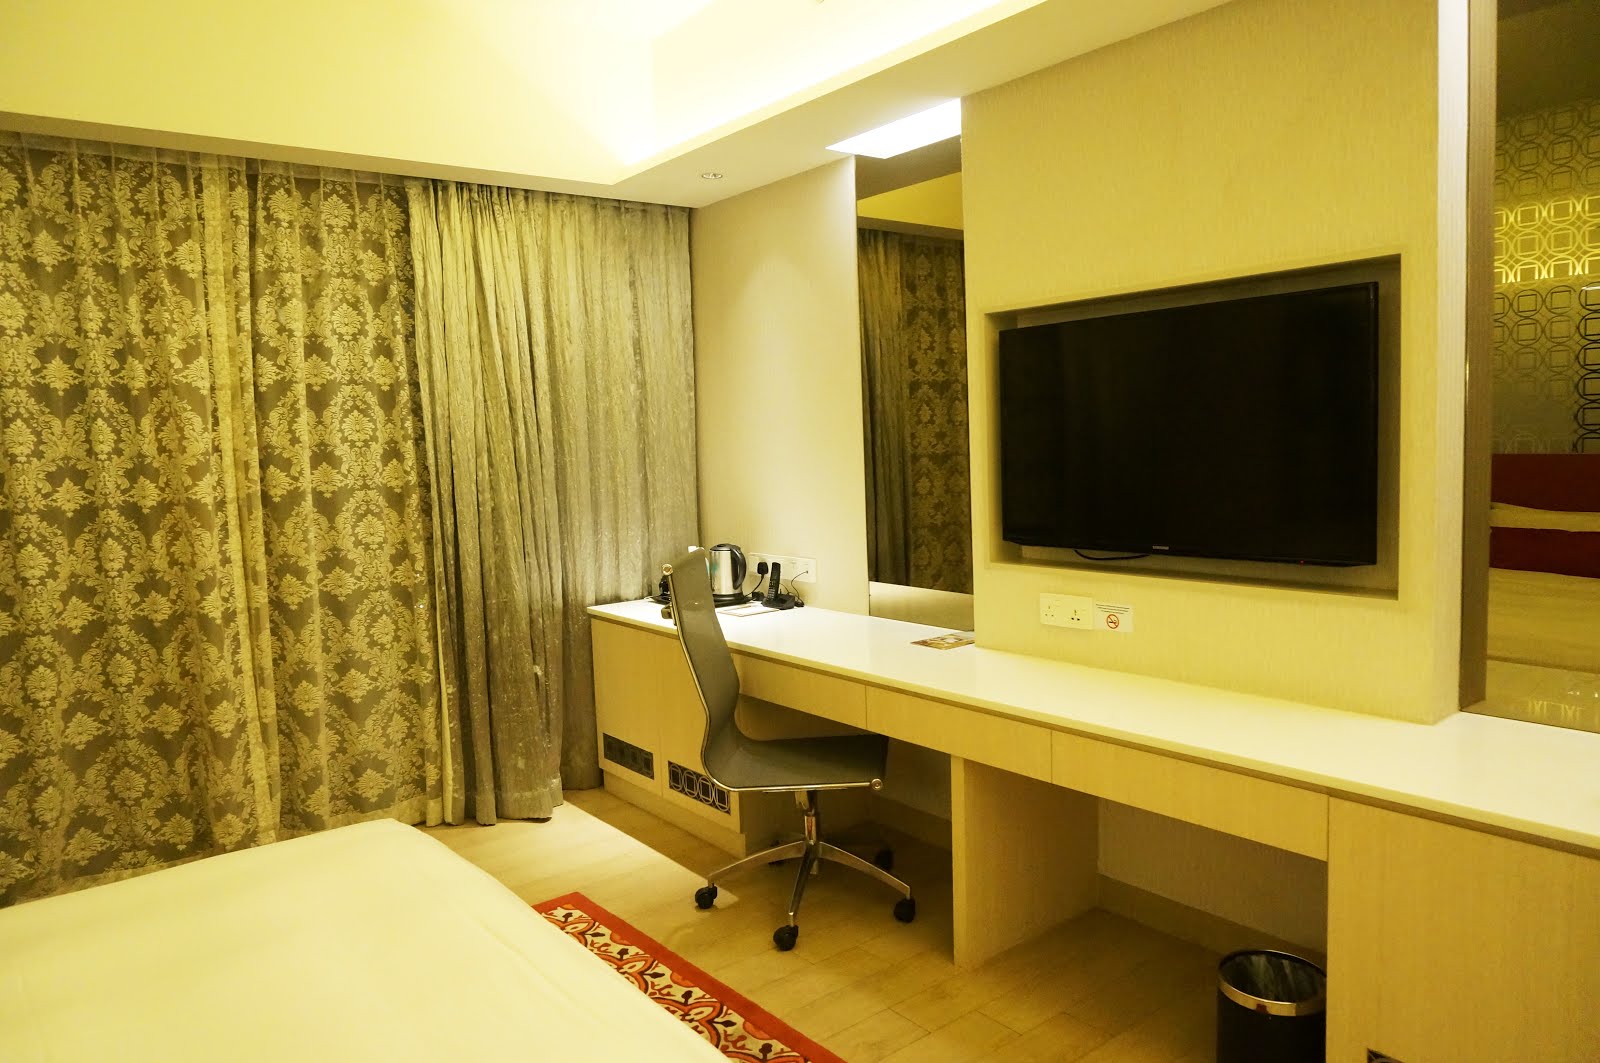 Village Hotel Katong Singapore Staycation Review pic image